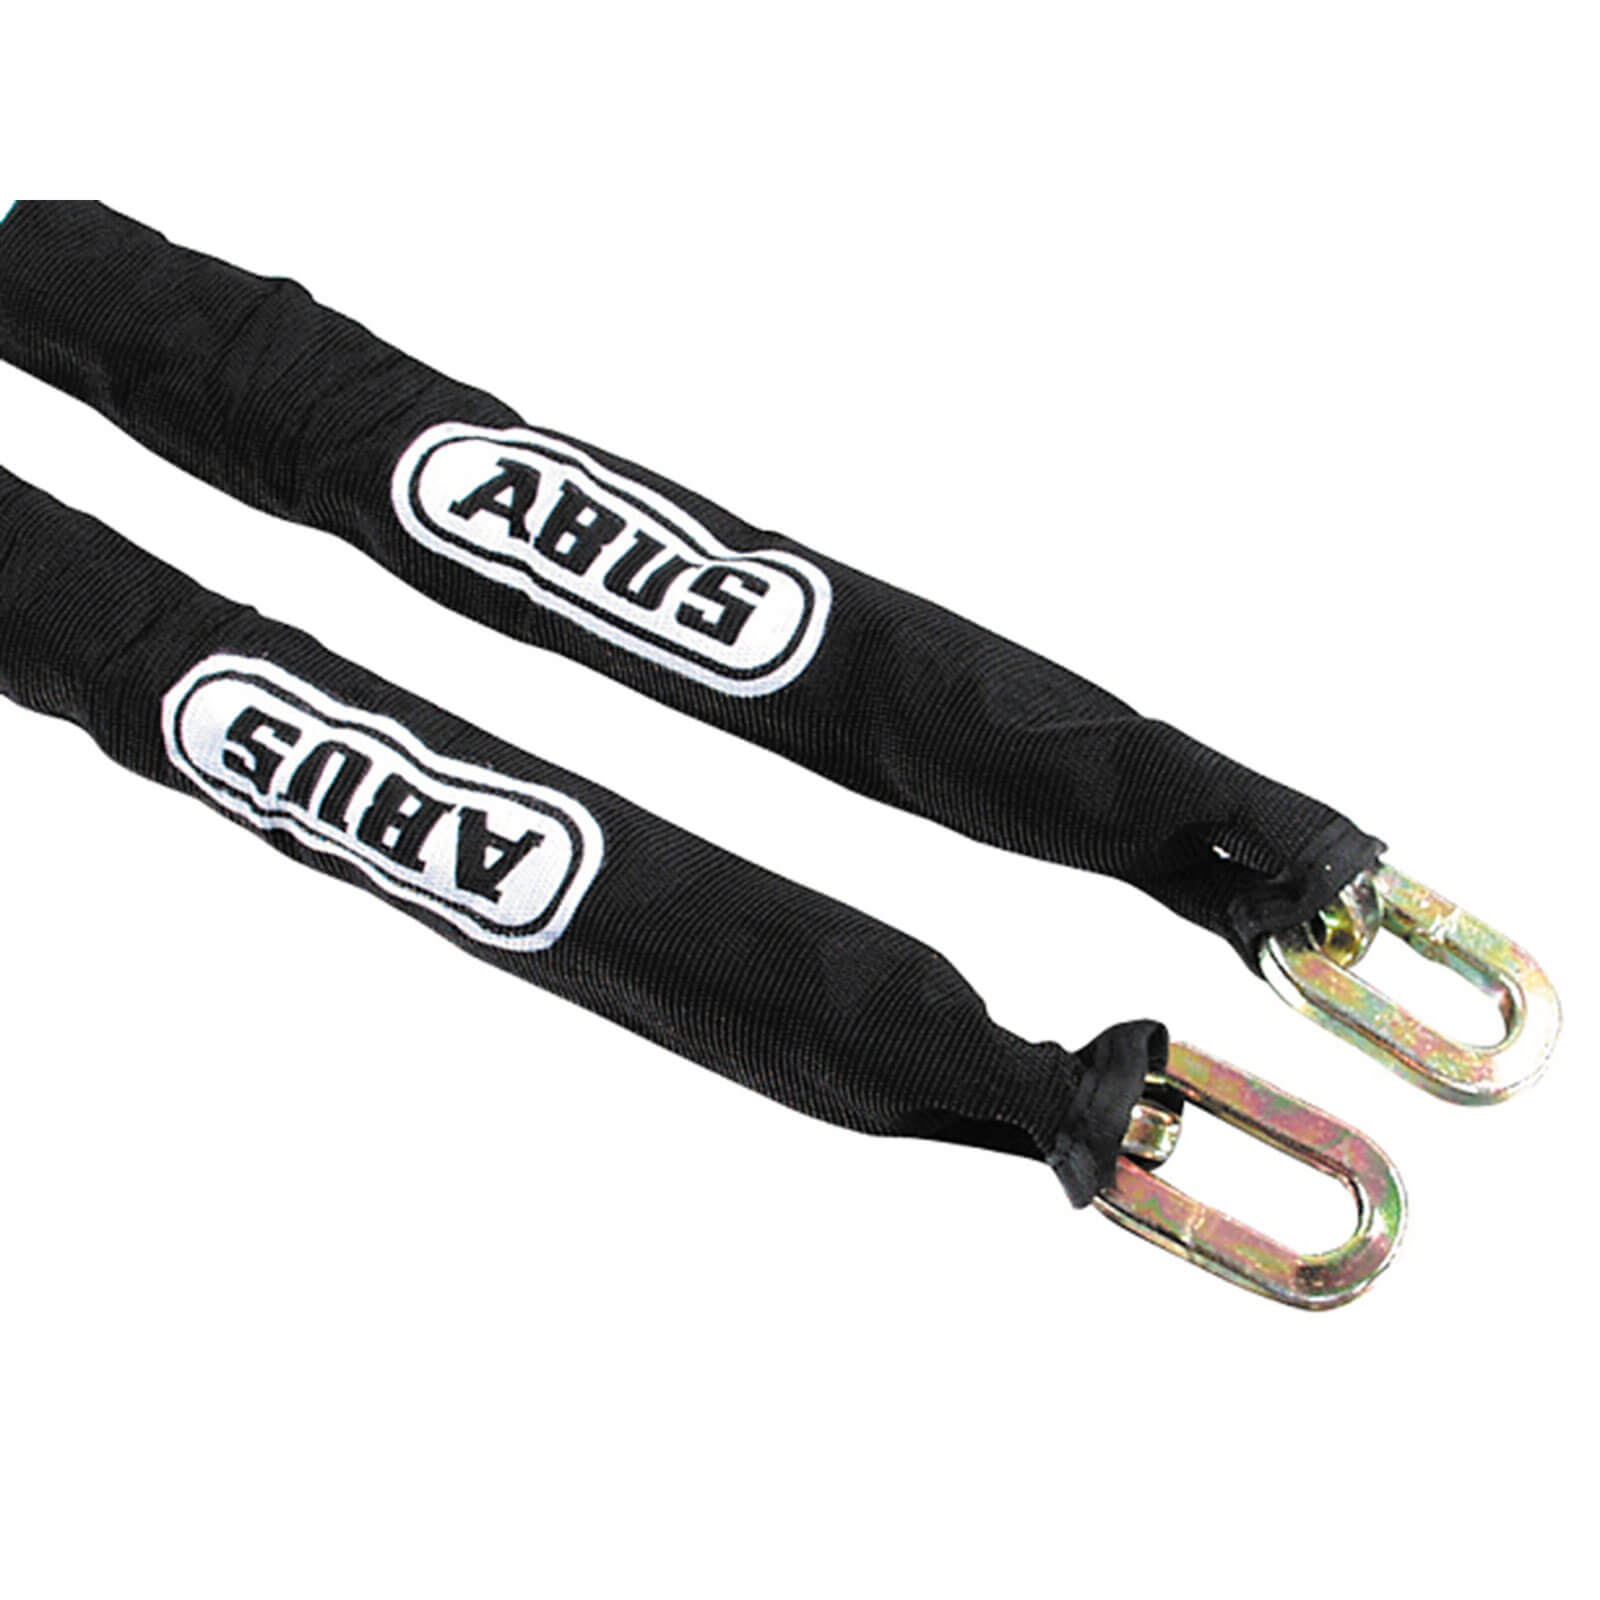 Image of Abus 10Ks 1700mm Hardened Security Chain 10mm Link Diameter